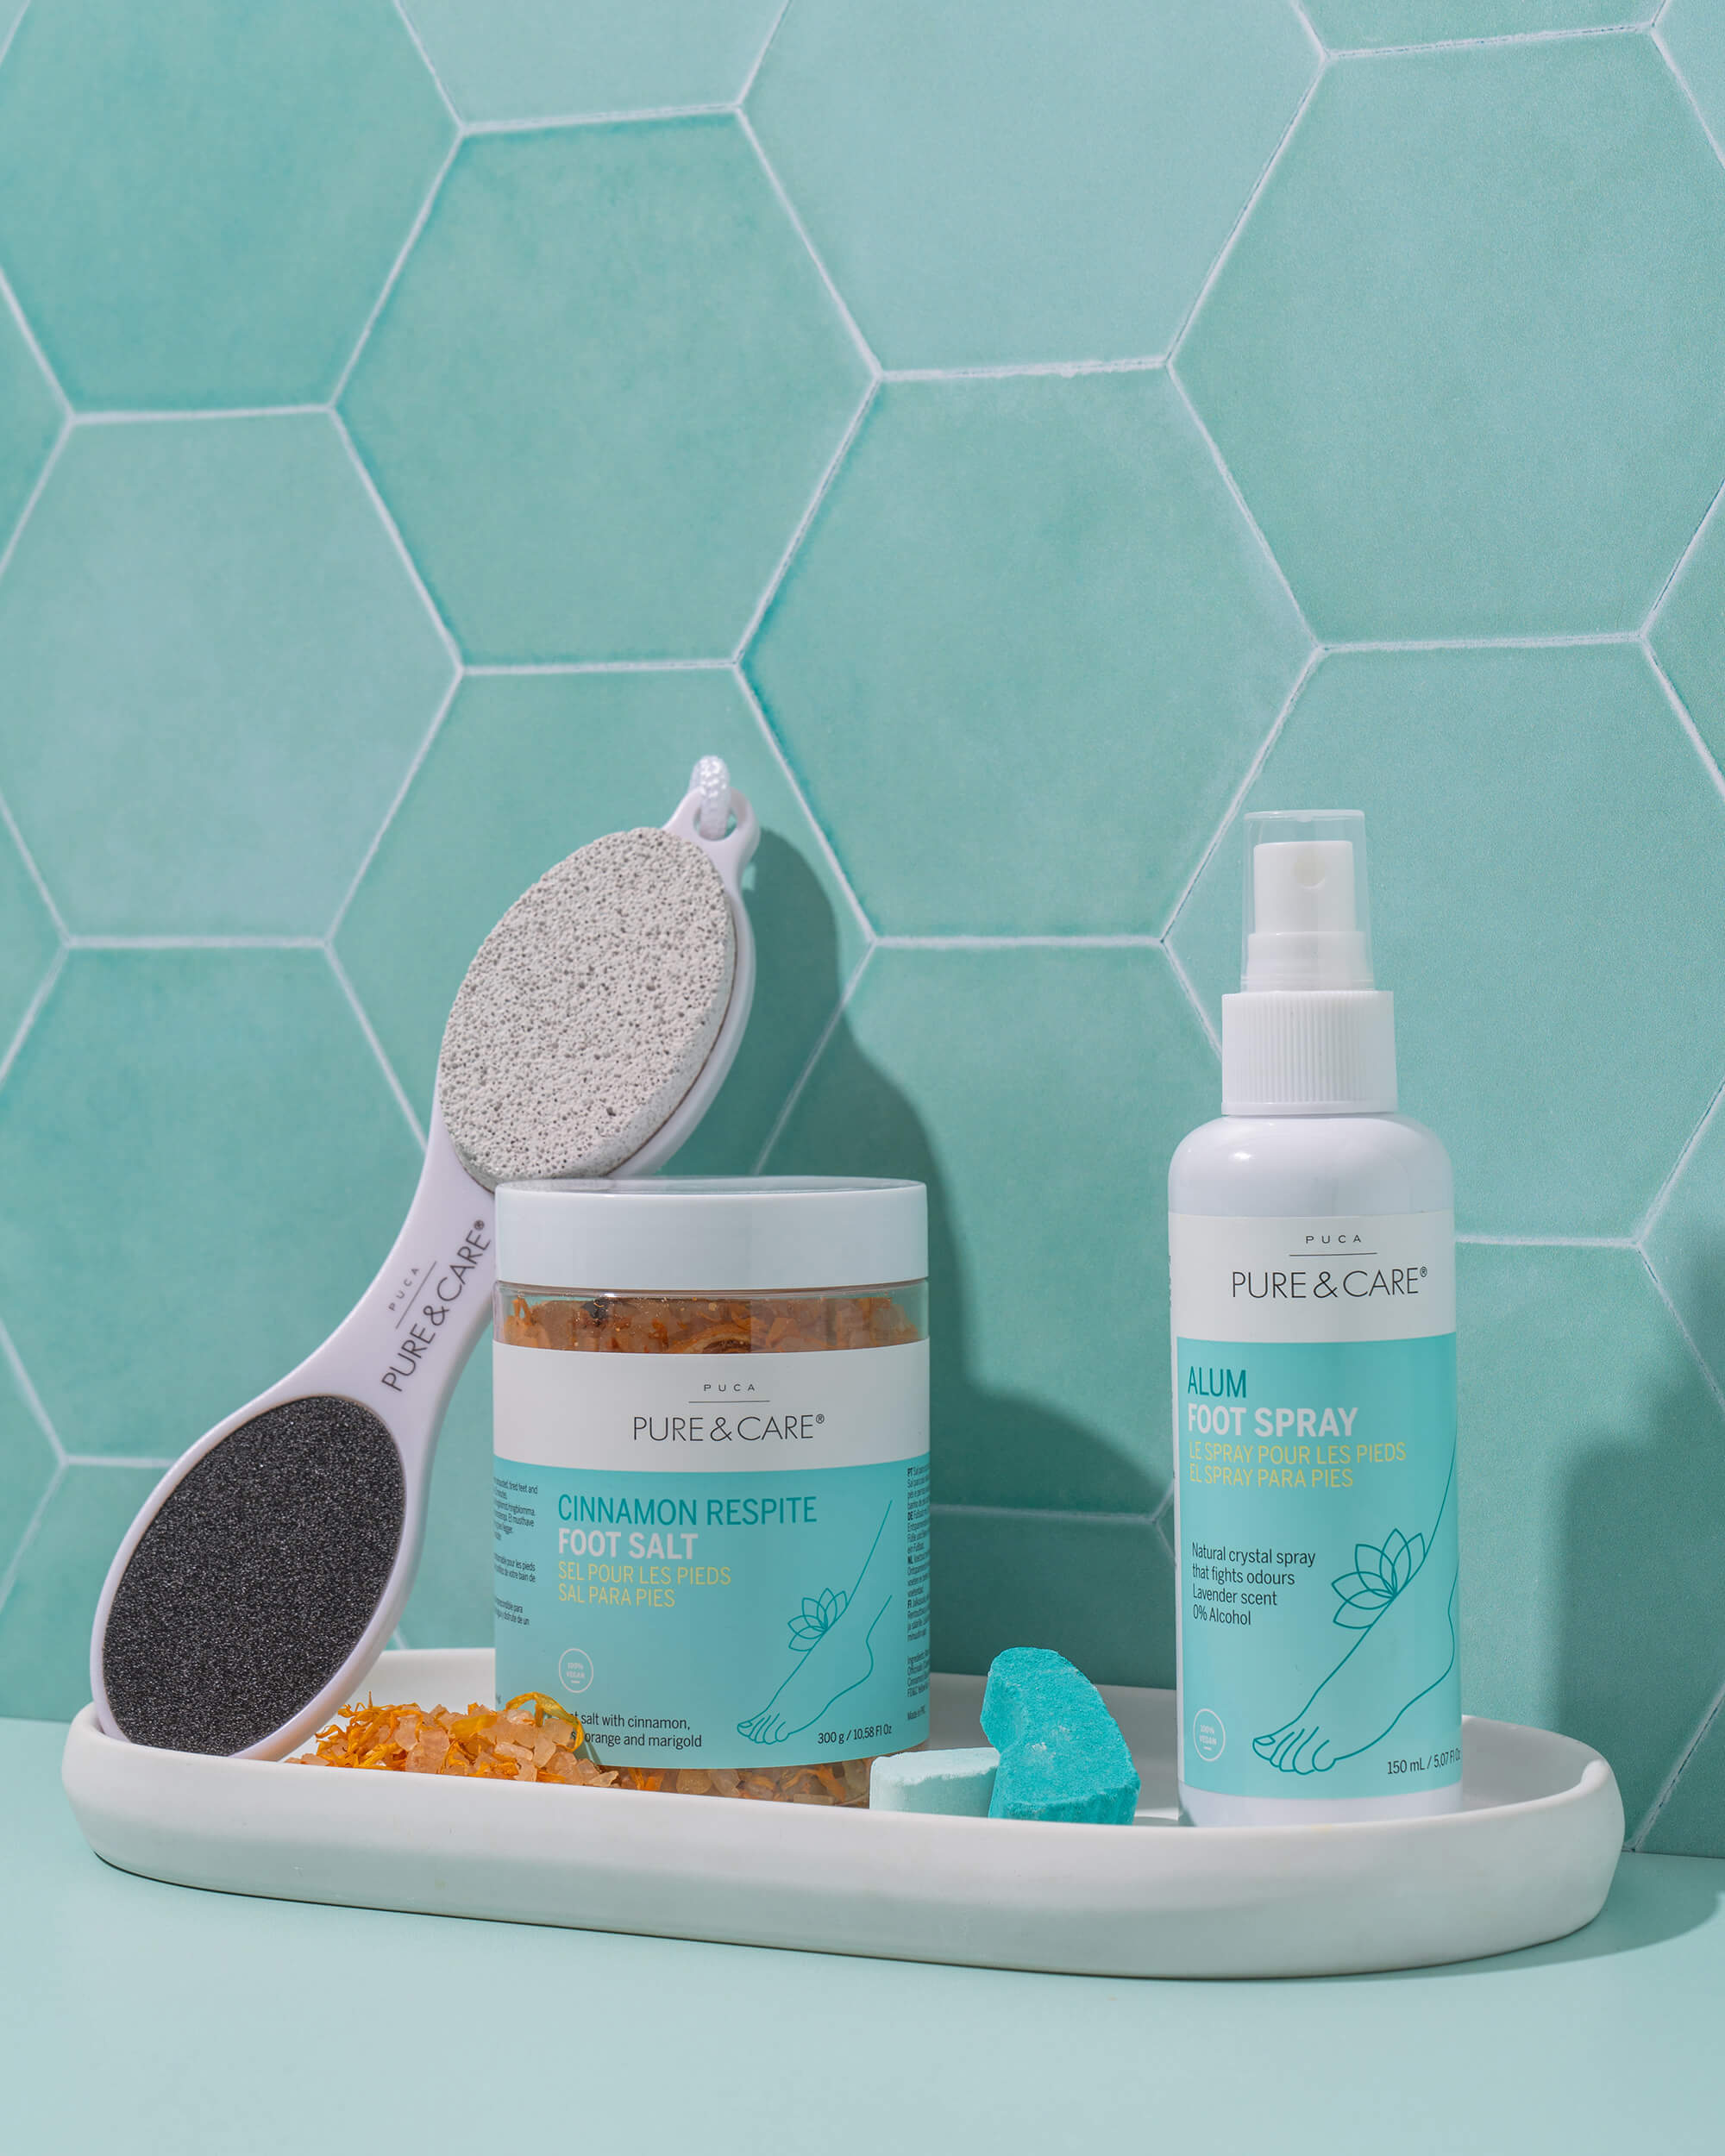 Foot Care Collection I PUCA - PURE & CARE